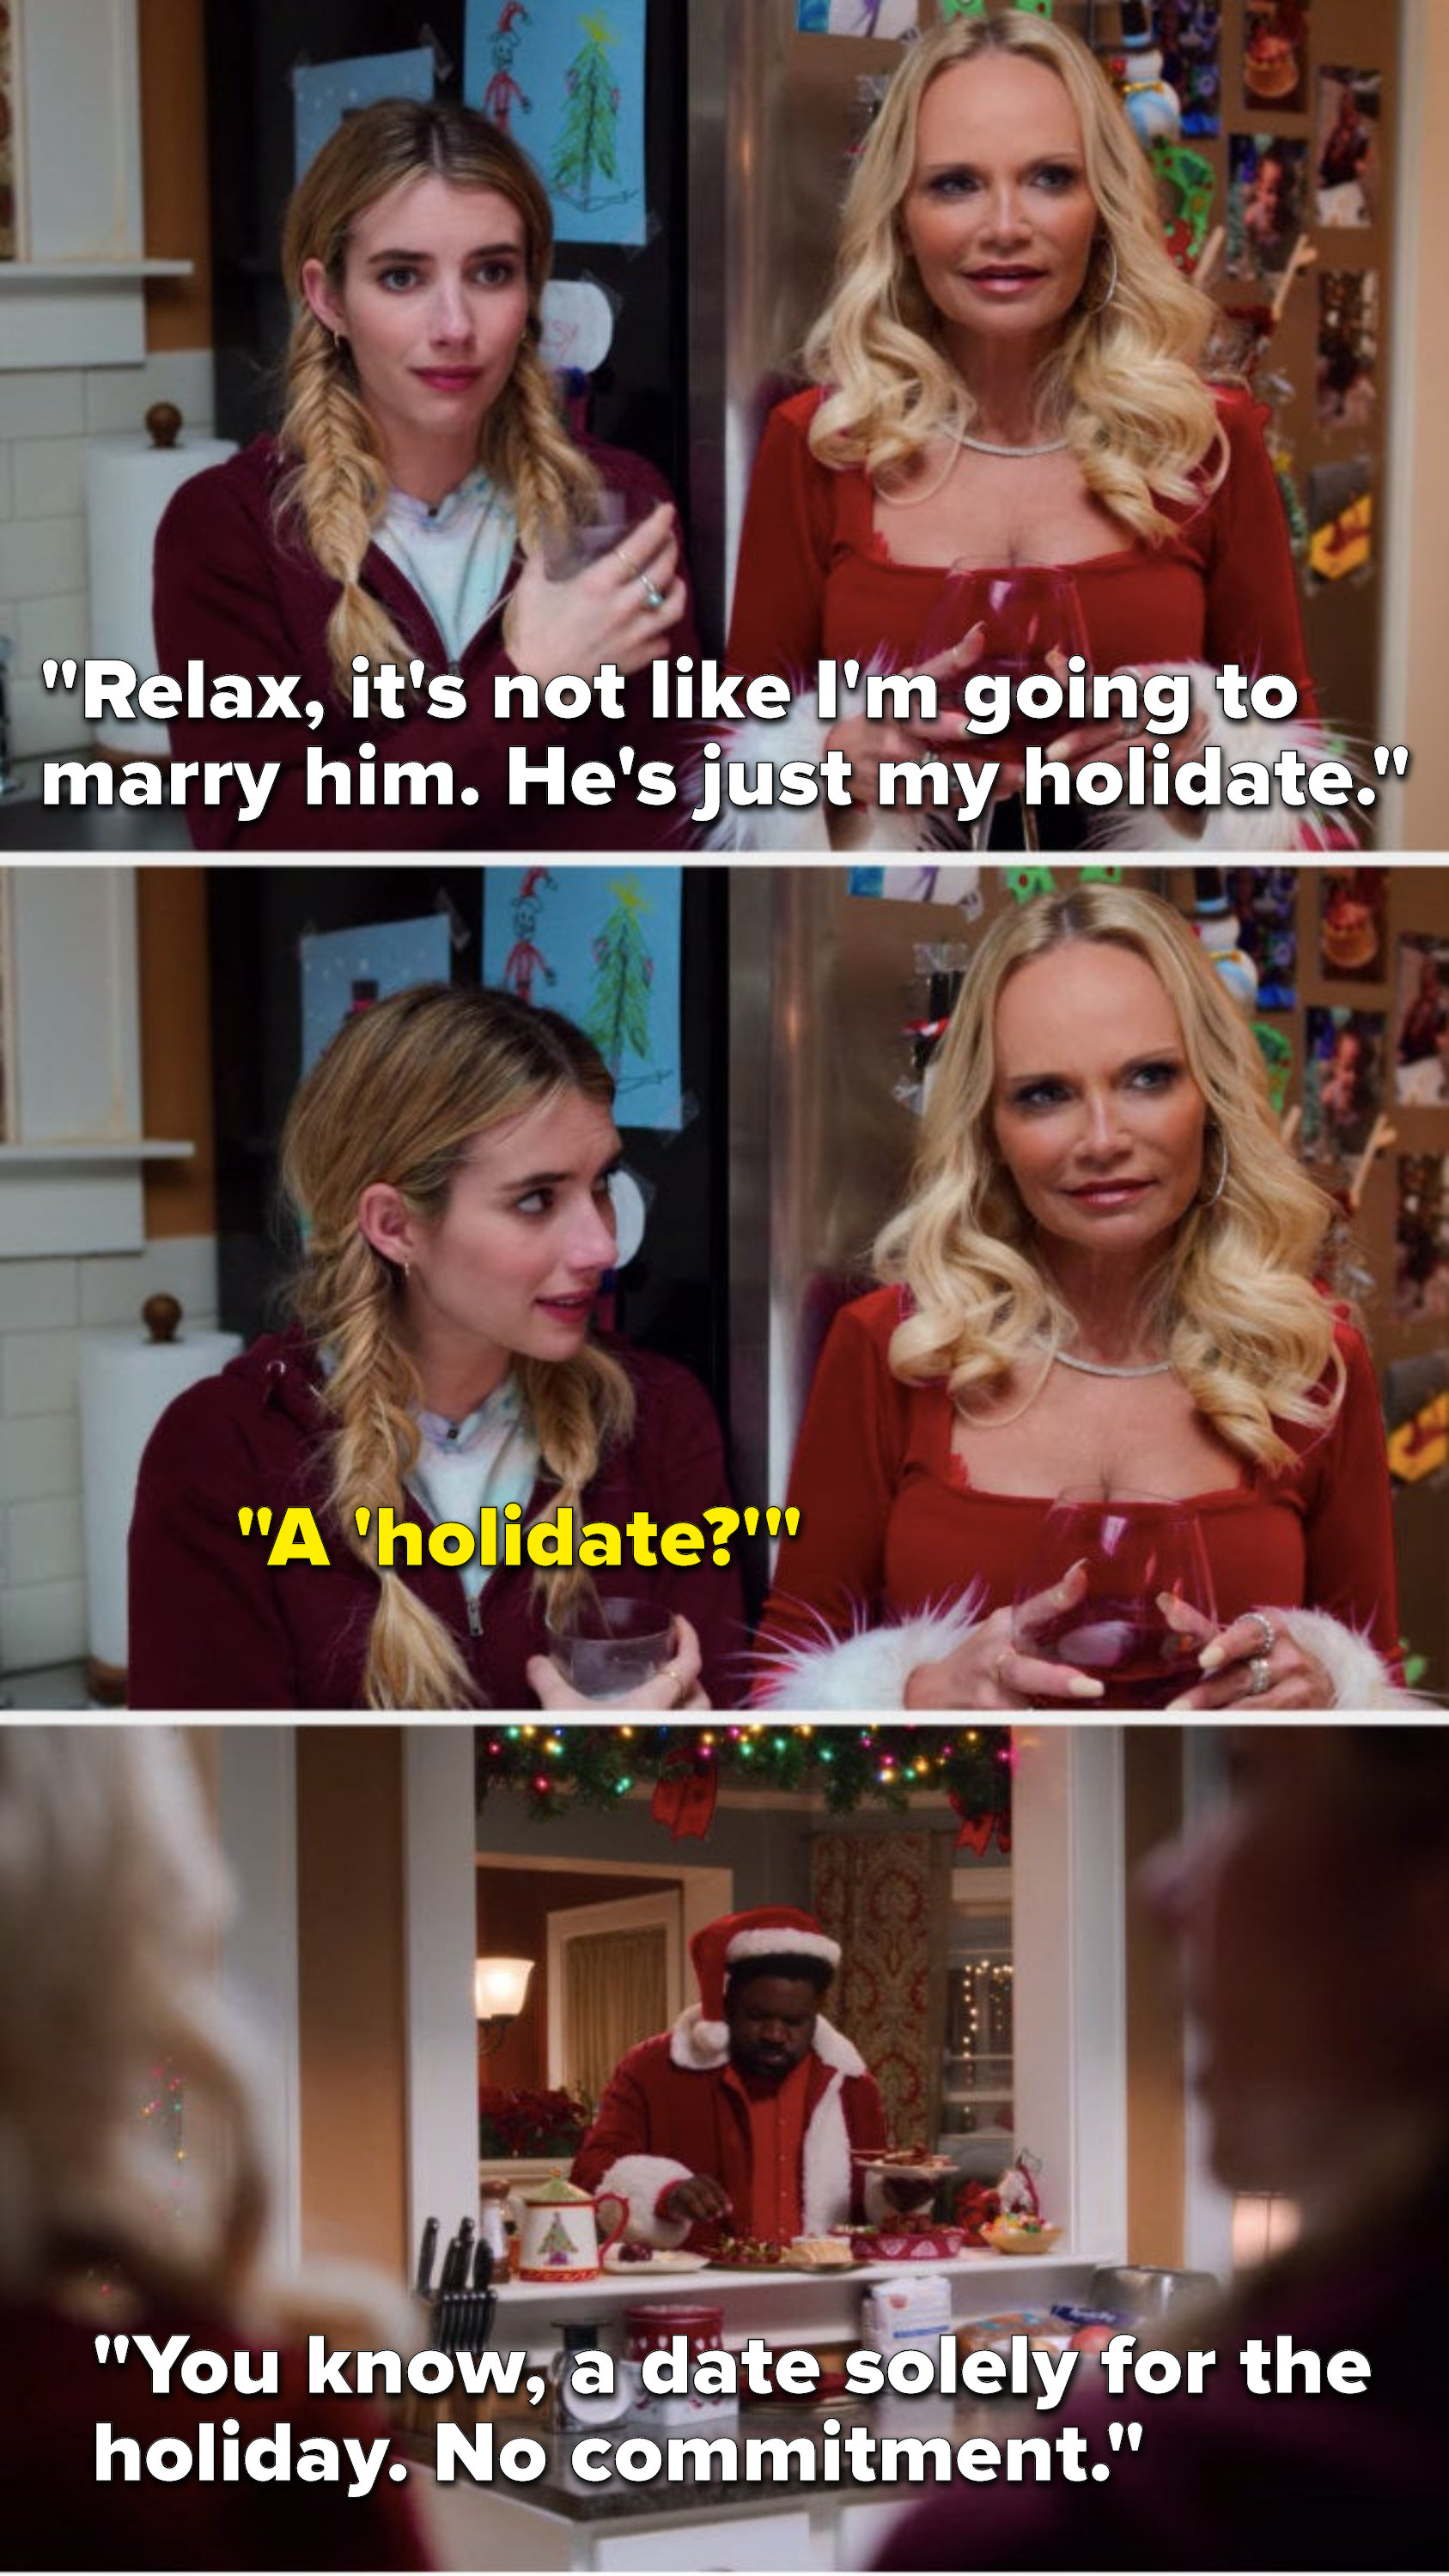 Kristin Chenoweth says, &quot;Relax, it&#x27;s not like I&#x27;m going to marry him, he&#x27;s just my holidate,&quot; Sloane asks, &quot;A &#x27;holidate,&#x27;&quot; and Kristin Chenoweth says, &quot;You know, a date solely for the holiday, no commitment&quot;